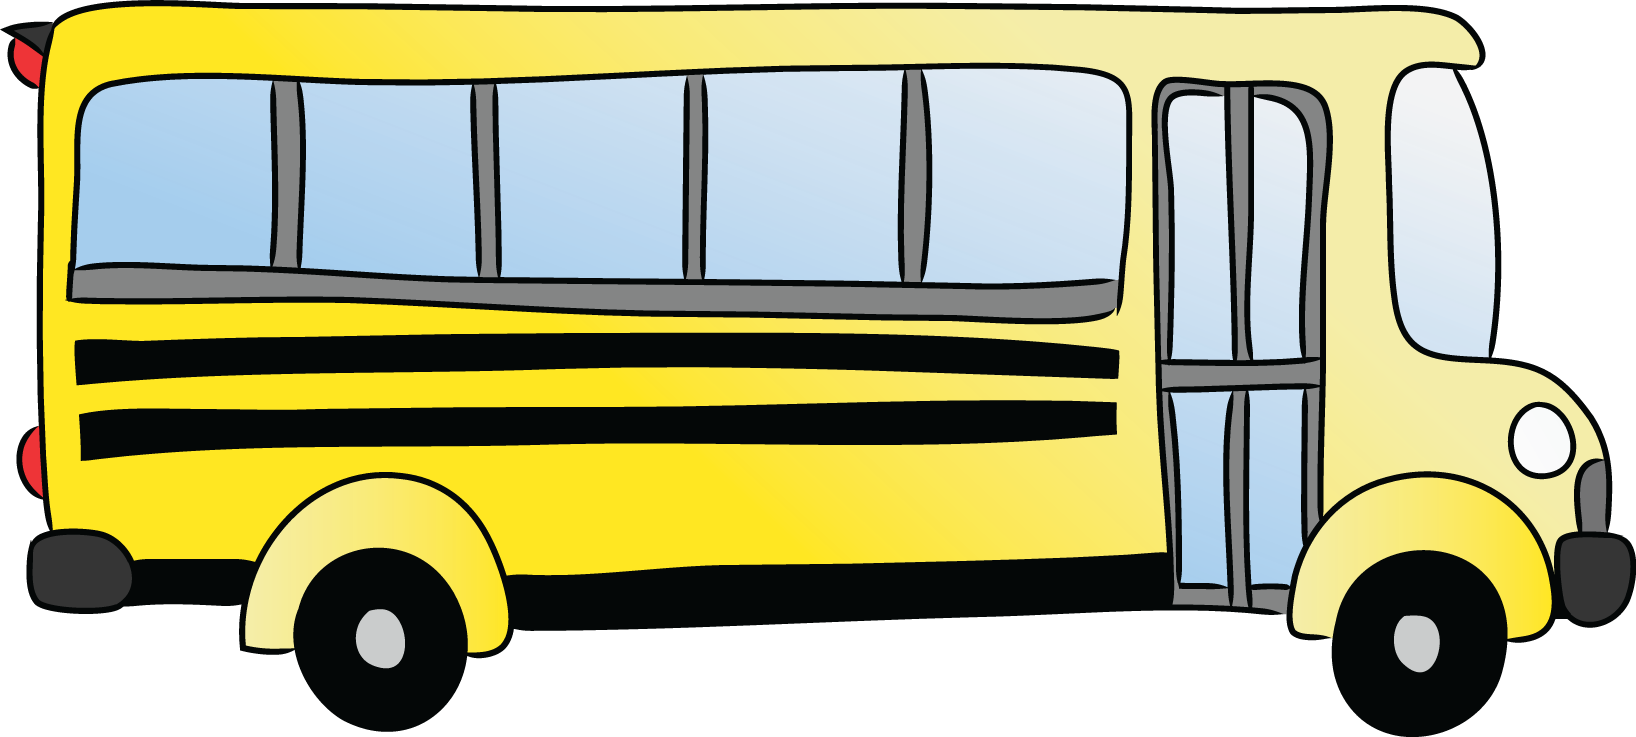 clipart school buses - photo #13